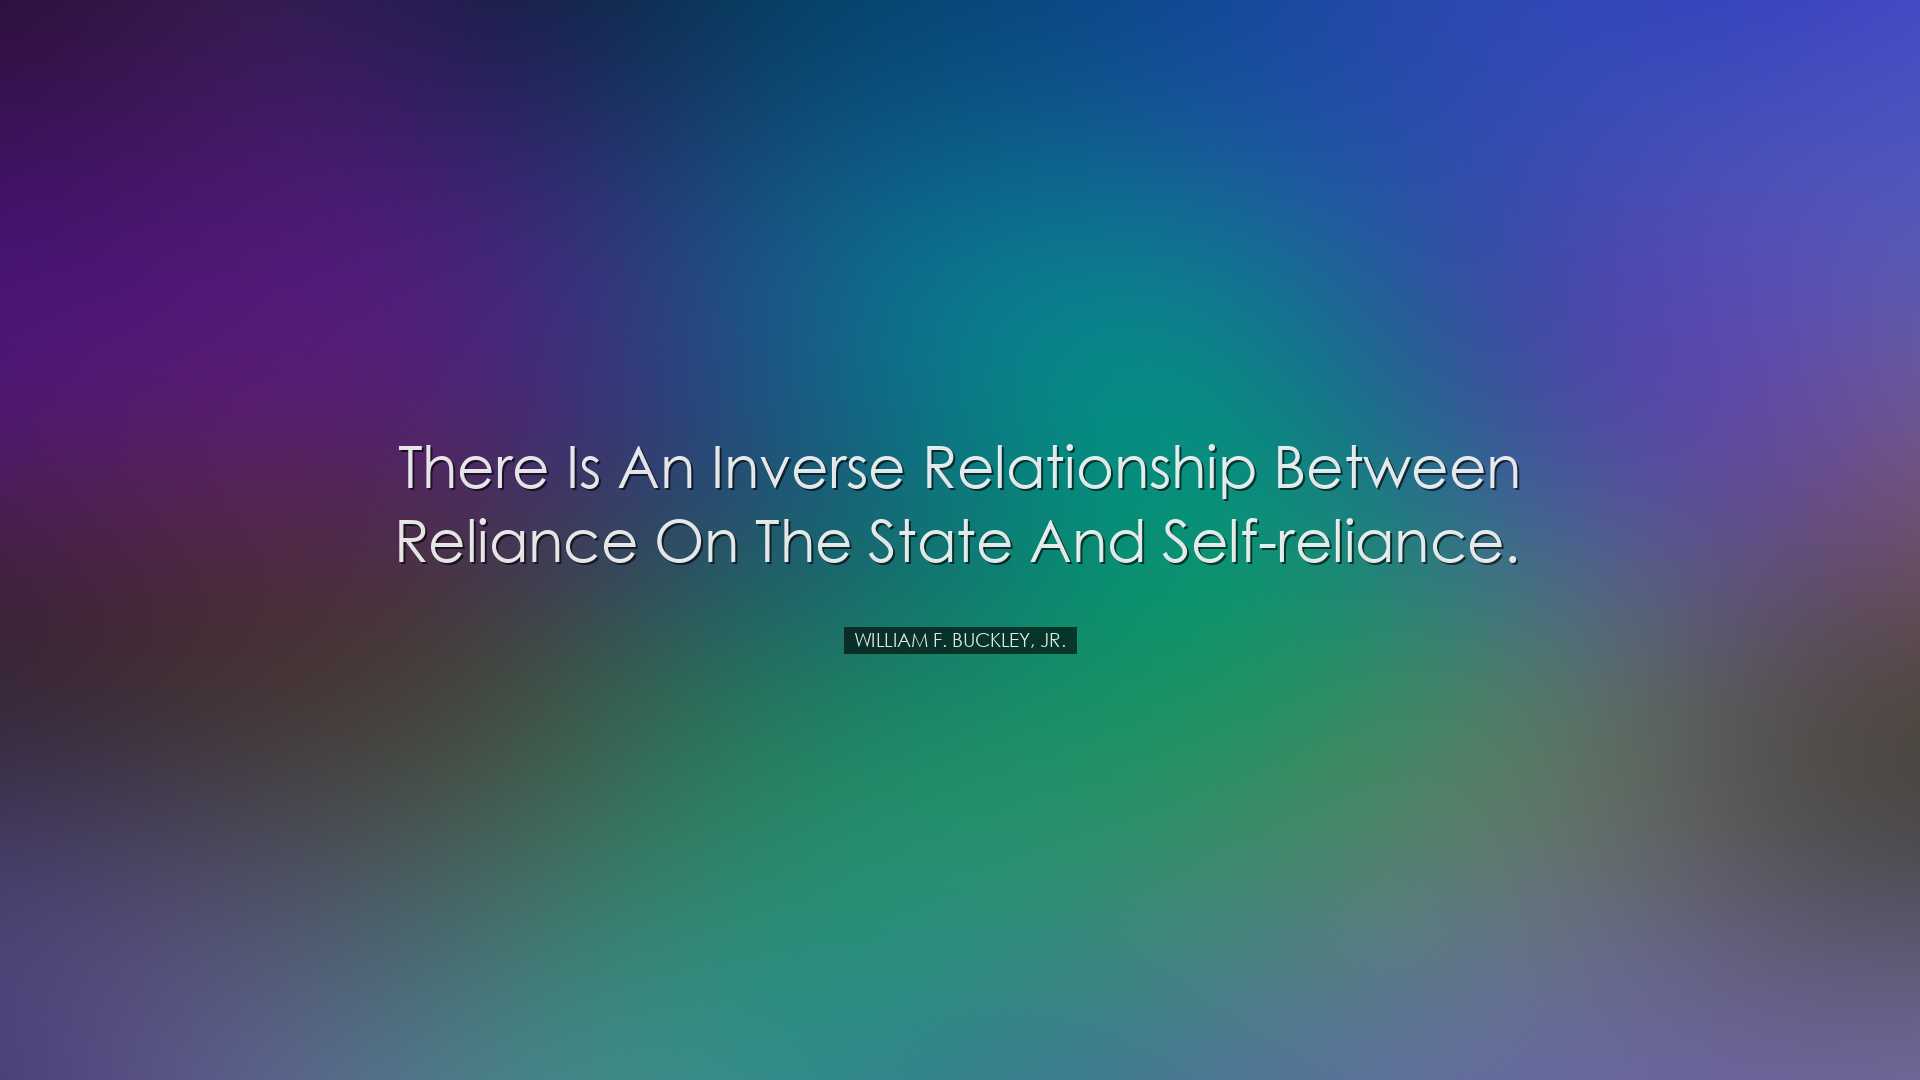 There is an inverse relationship between reliance on the state and